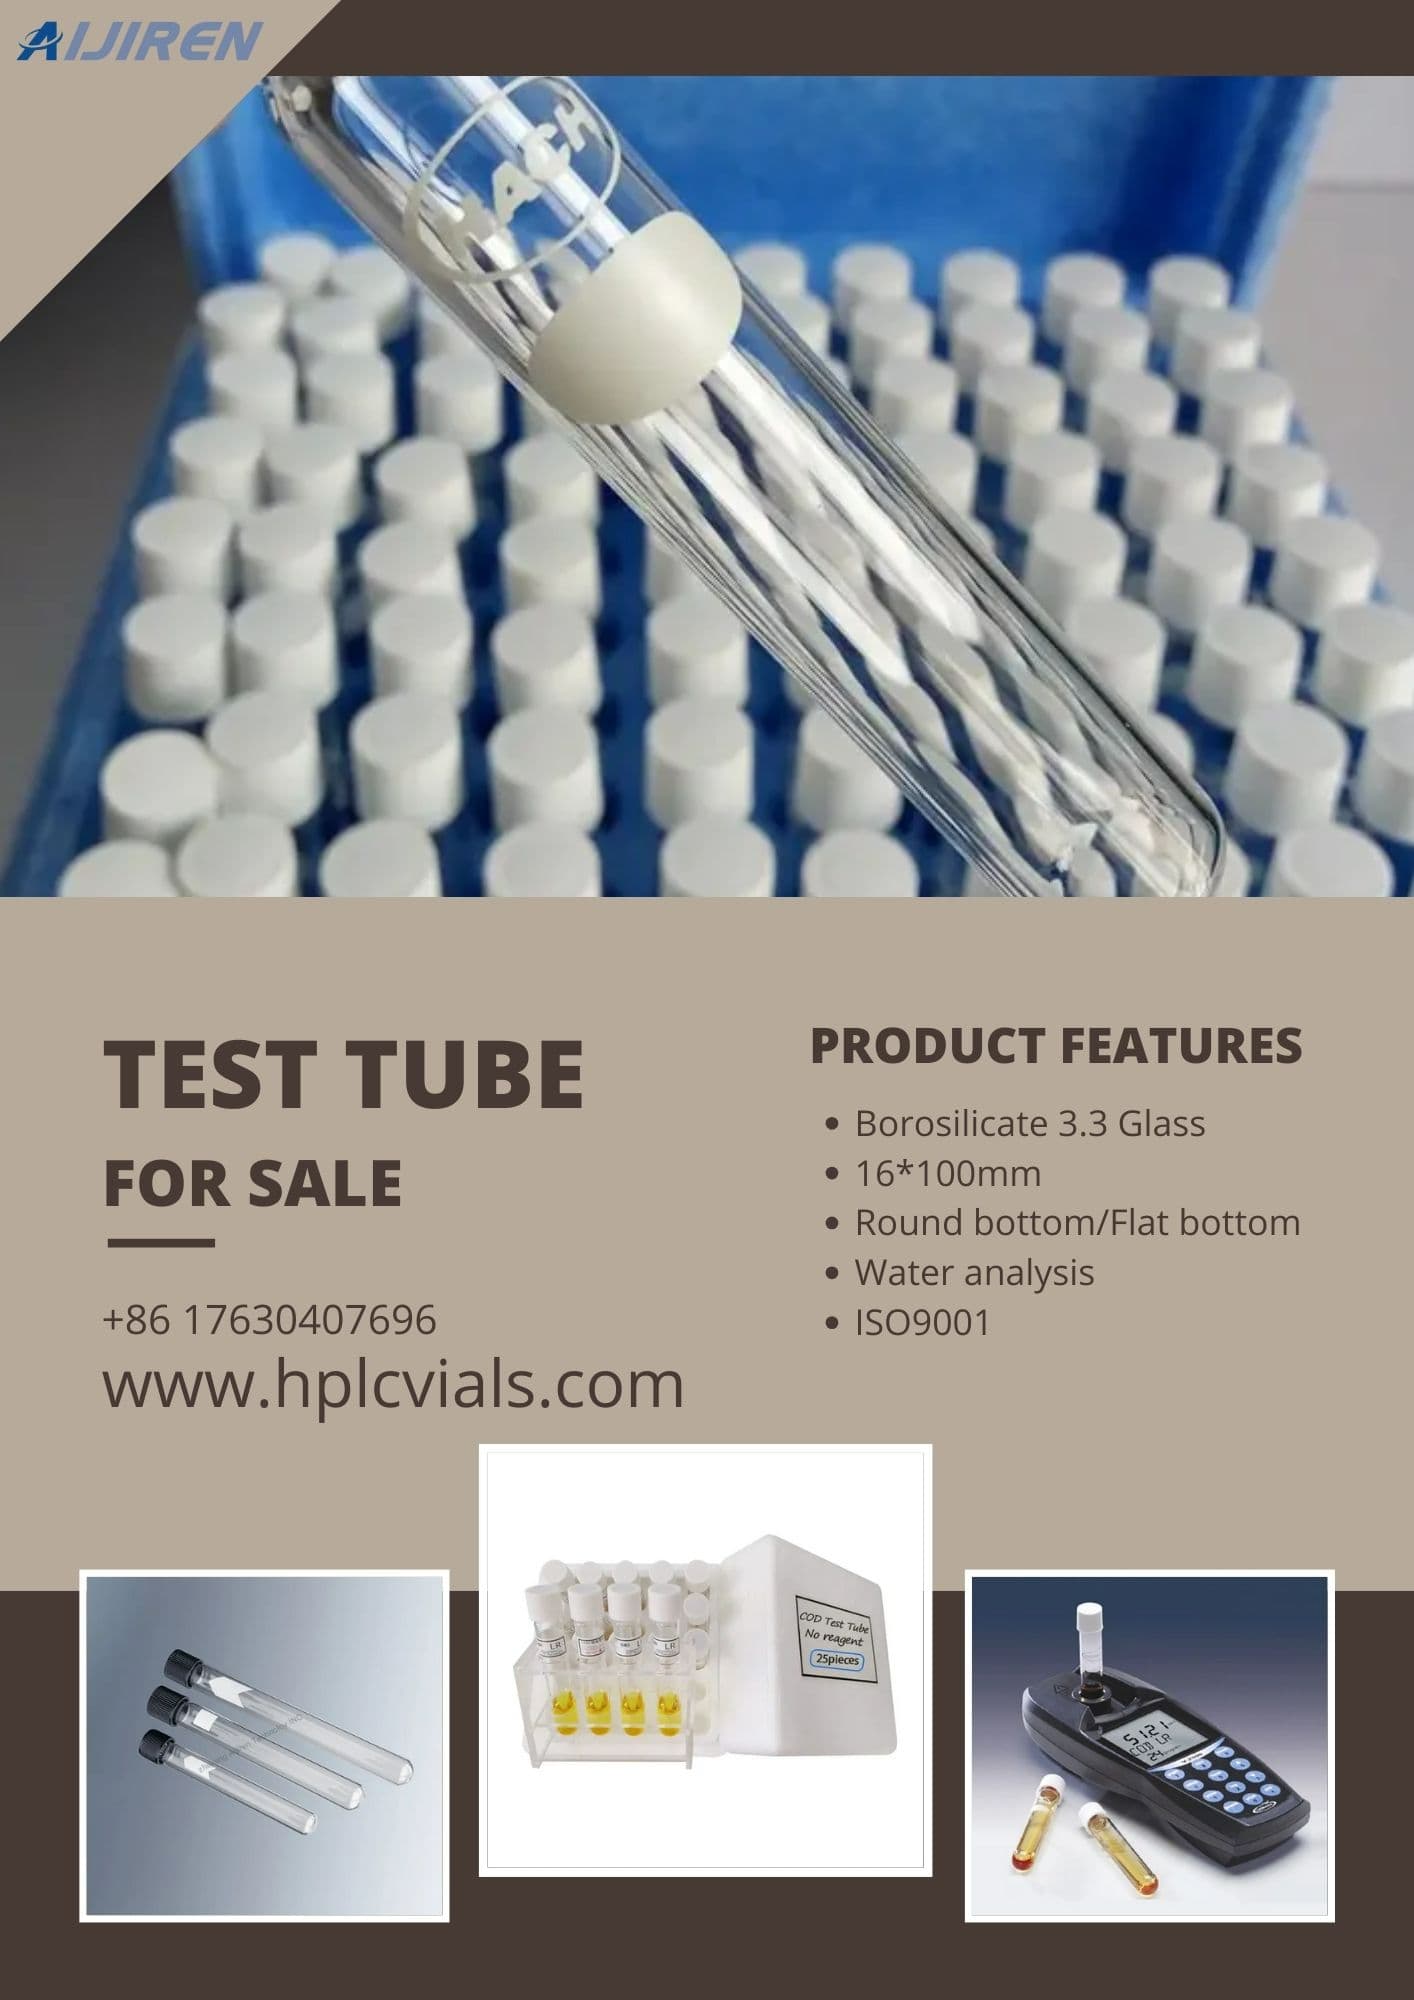 20ml headspace vialGlass Test Tube Borosilicate 3.3 Glass vial with screw cap with PTFE/Silicone septa